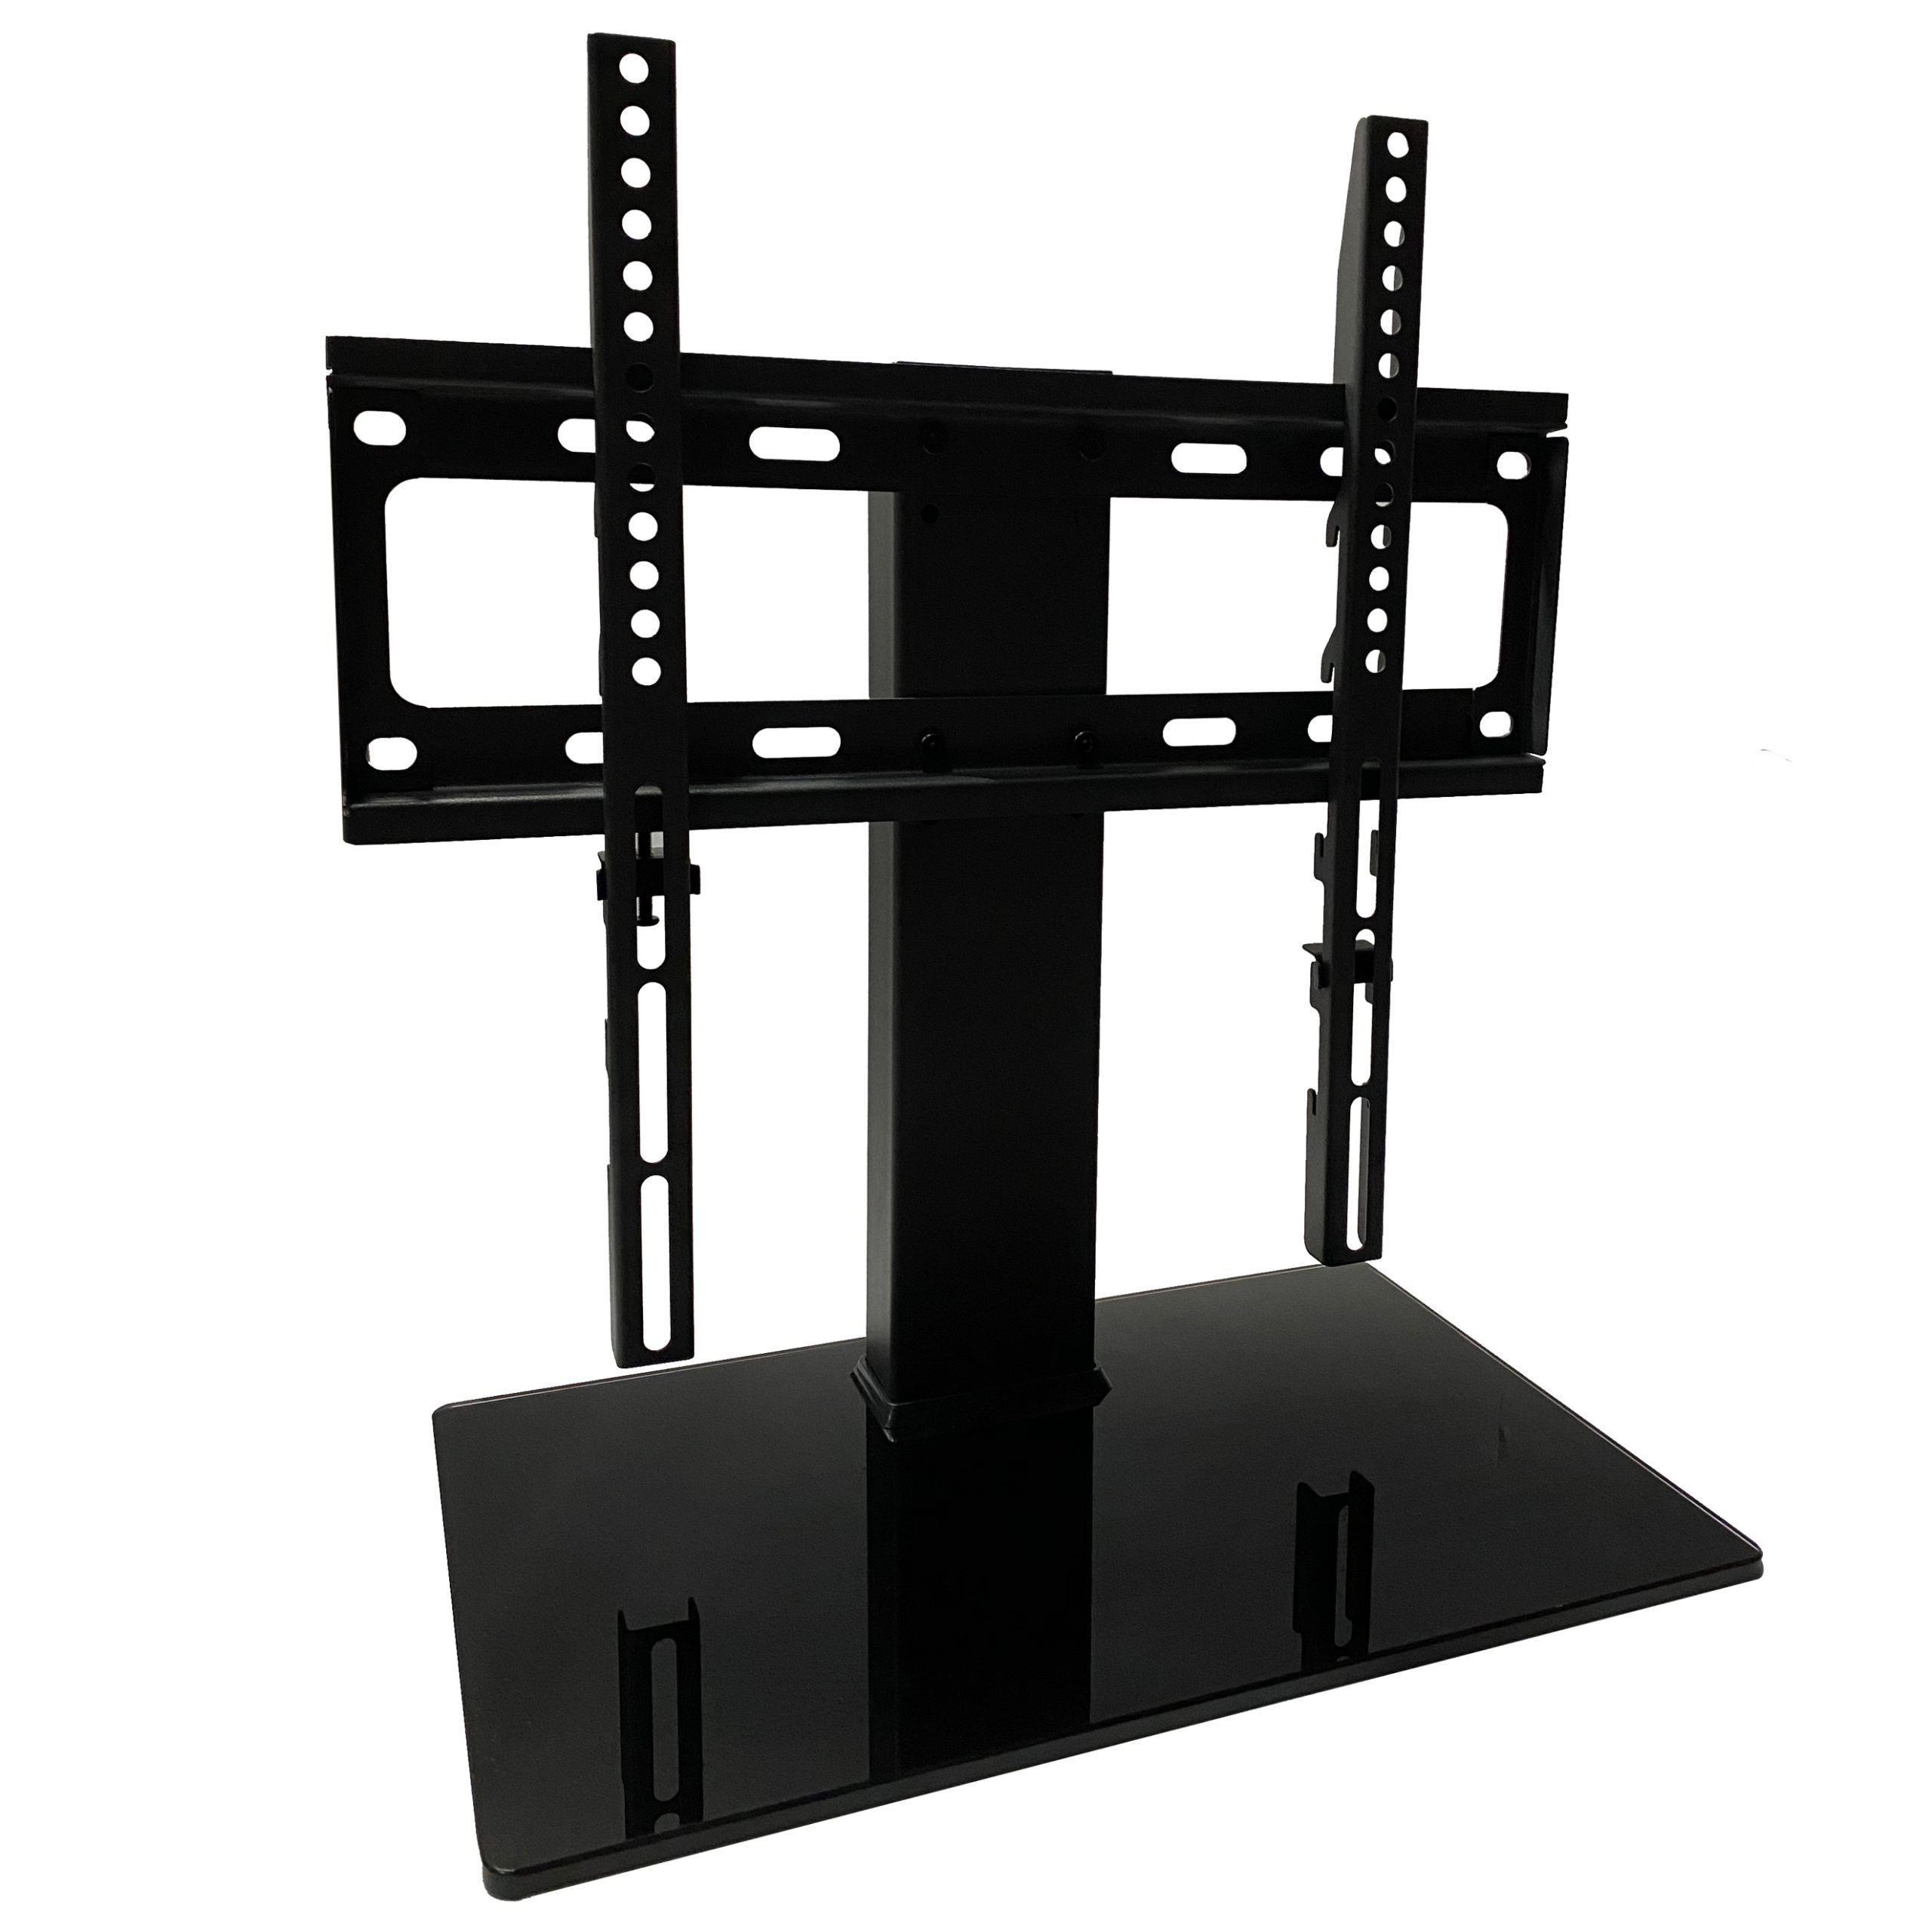 Tabletop Tv Stand Fit 26 55 Inch Tv | B&h Ergonomics Inside Tabletop Tv Stand (Photo 3 of 15)